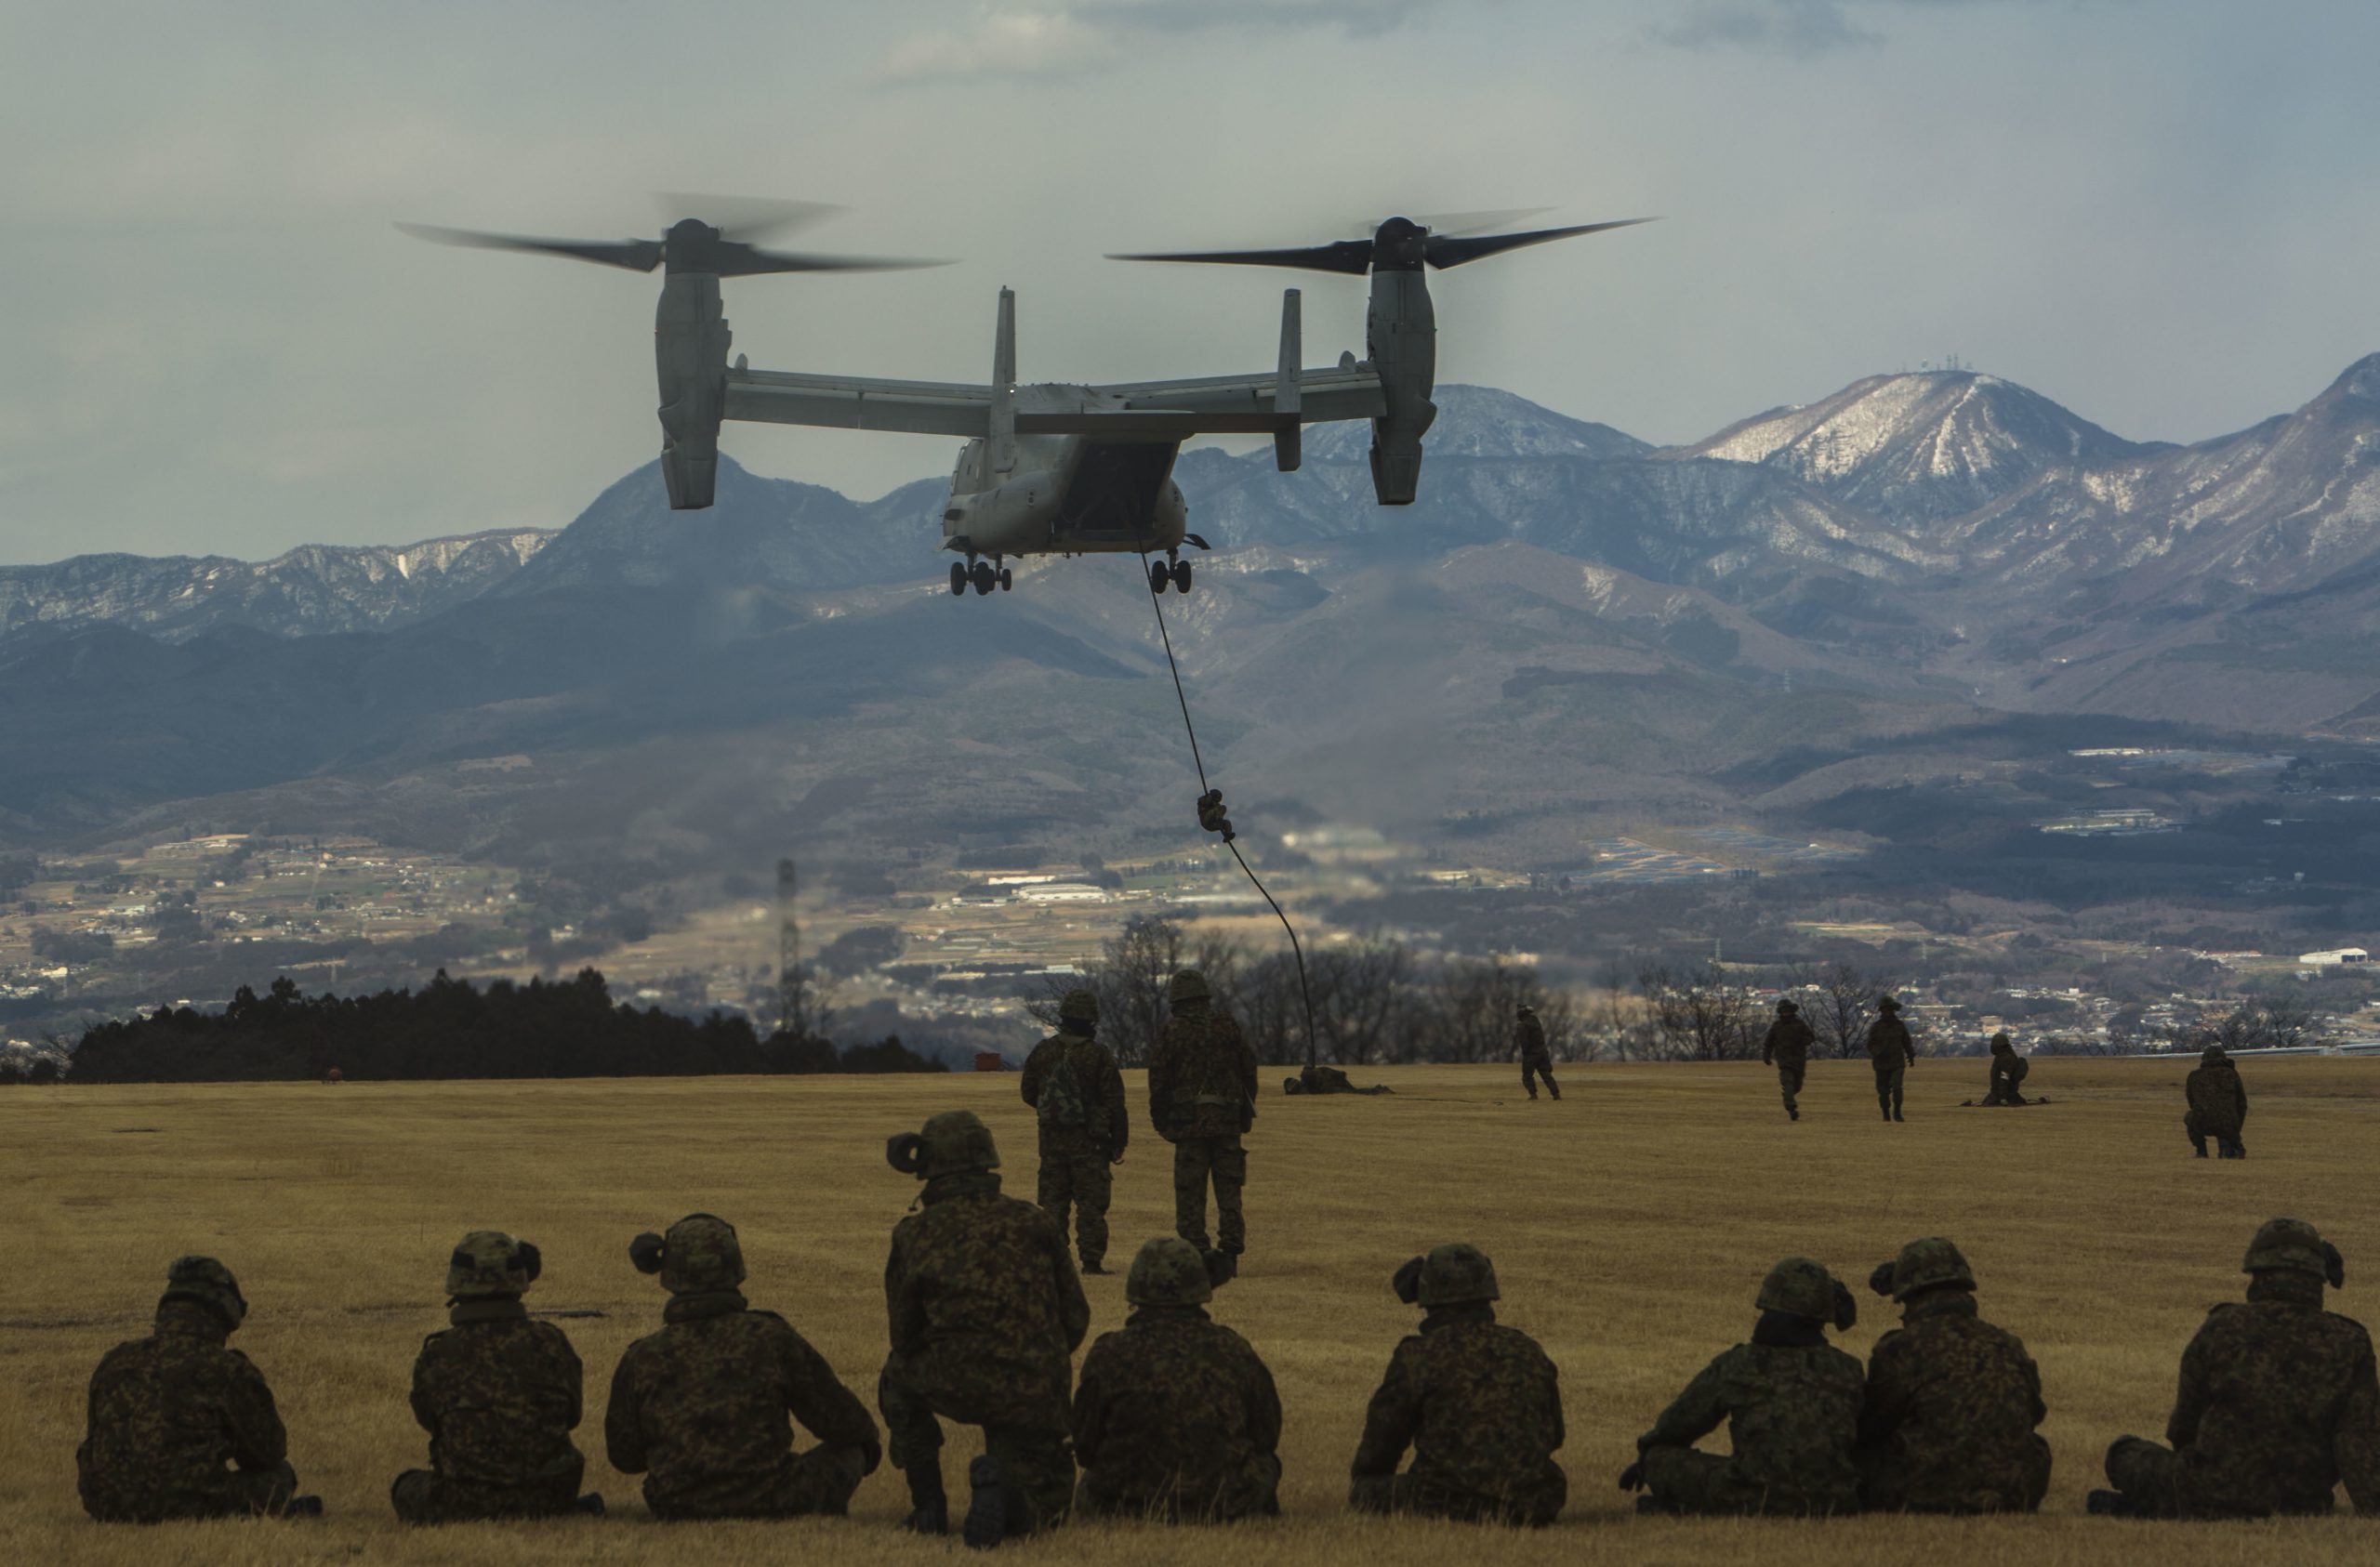 Members of the Japanese Ground Self-Defense Force, 30th Infantry Regiment, 12th Brigade, Eastern Army, fast rope out of an MV-22B Osprey tilt-rotor aircraft during Forest Light 17-1 at Camp Soumagahara, Japan, March 9, 2017. Forest Light is a semi-annual exercise conducted by U.S. and Japanese forces to strengthen interoperability and combined capabilities in defense. Marine Corps photo by Cpl. Kelsey Dornfeld. -